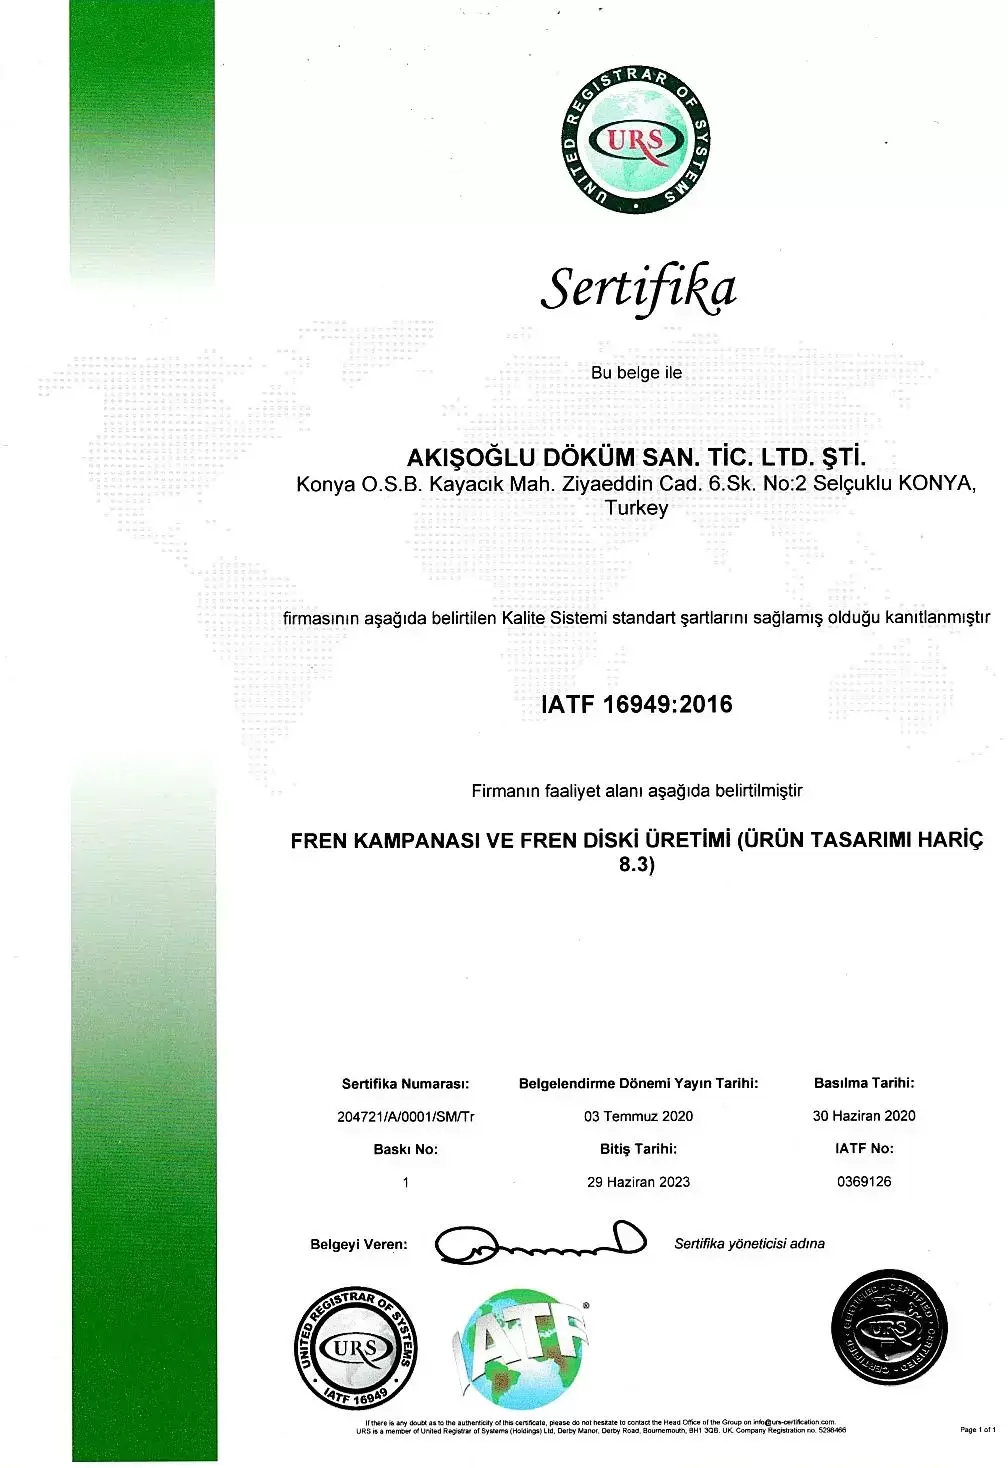 We Received Our IATF 16949:2016 Quality Certificate